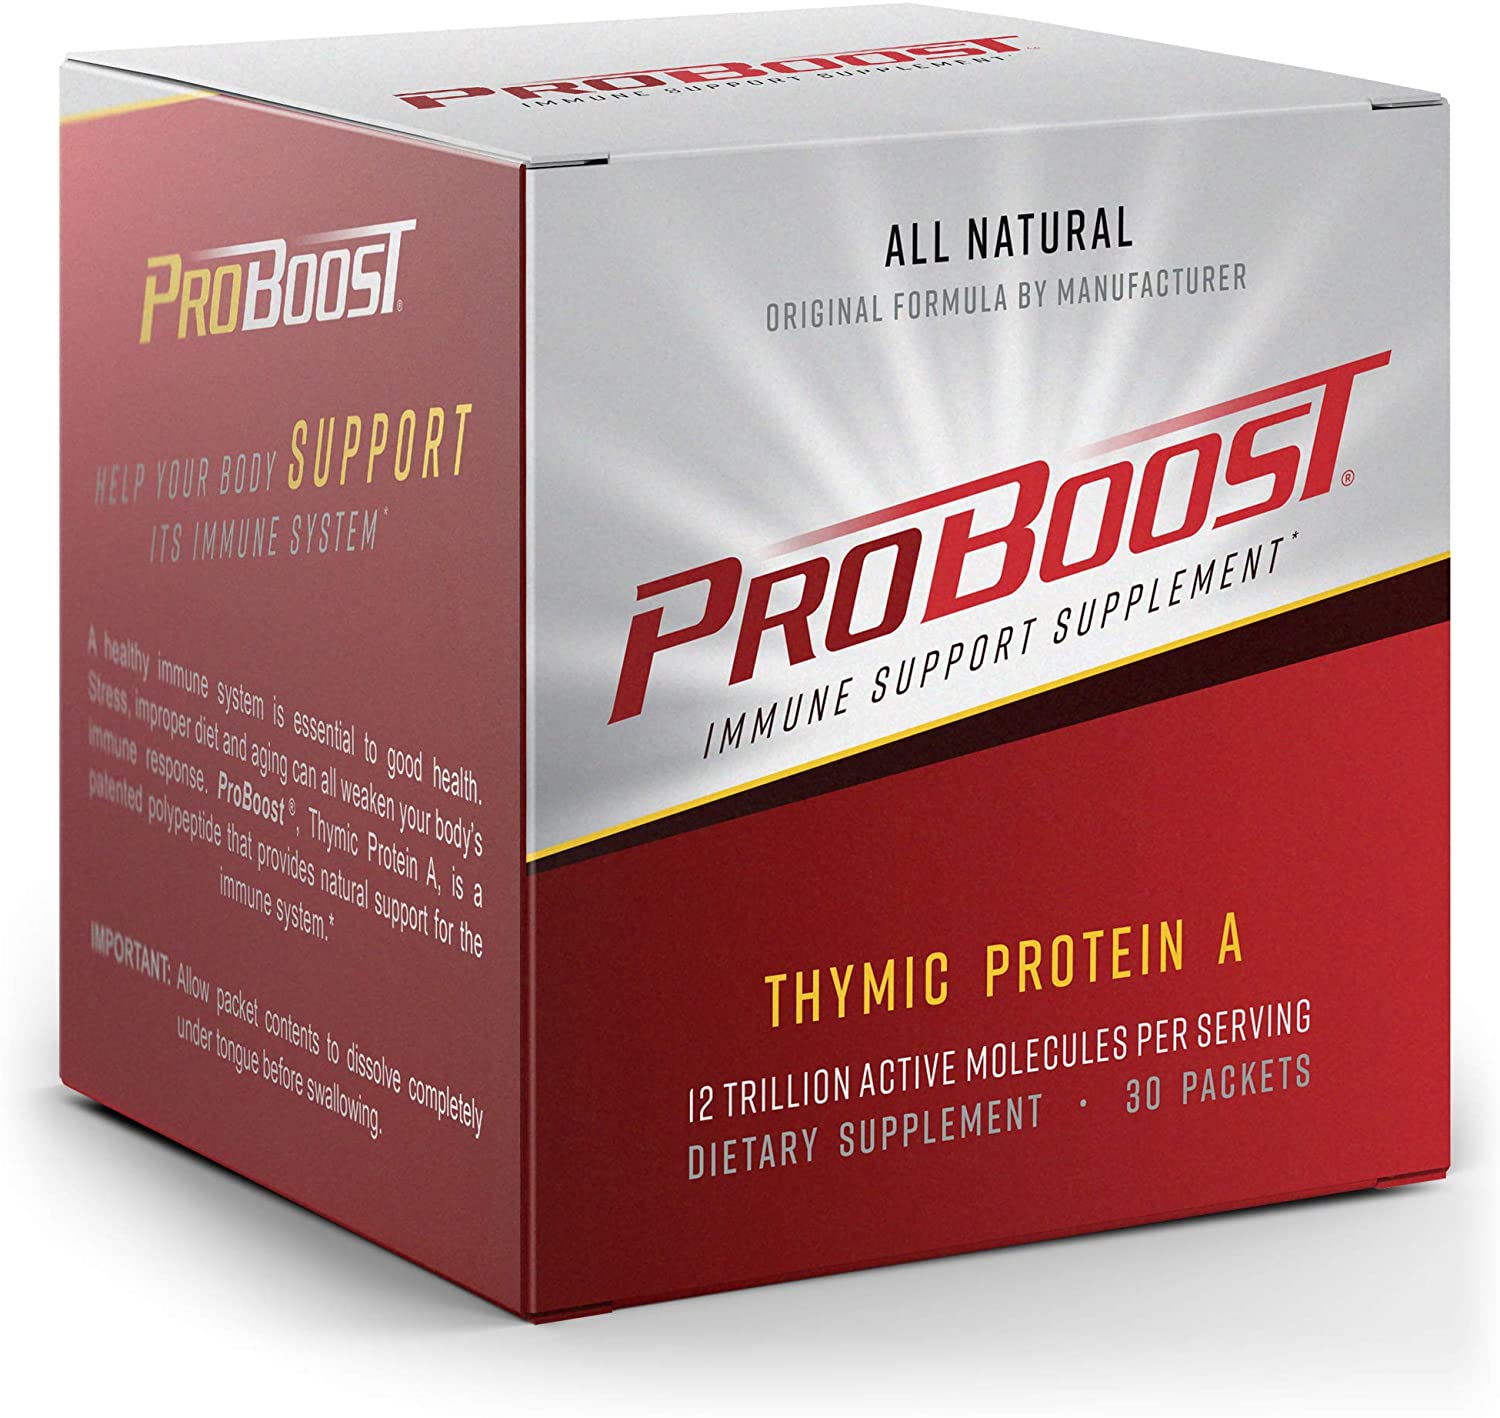 ProBoost Thymic Protein A - 30 Packets-2